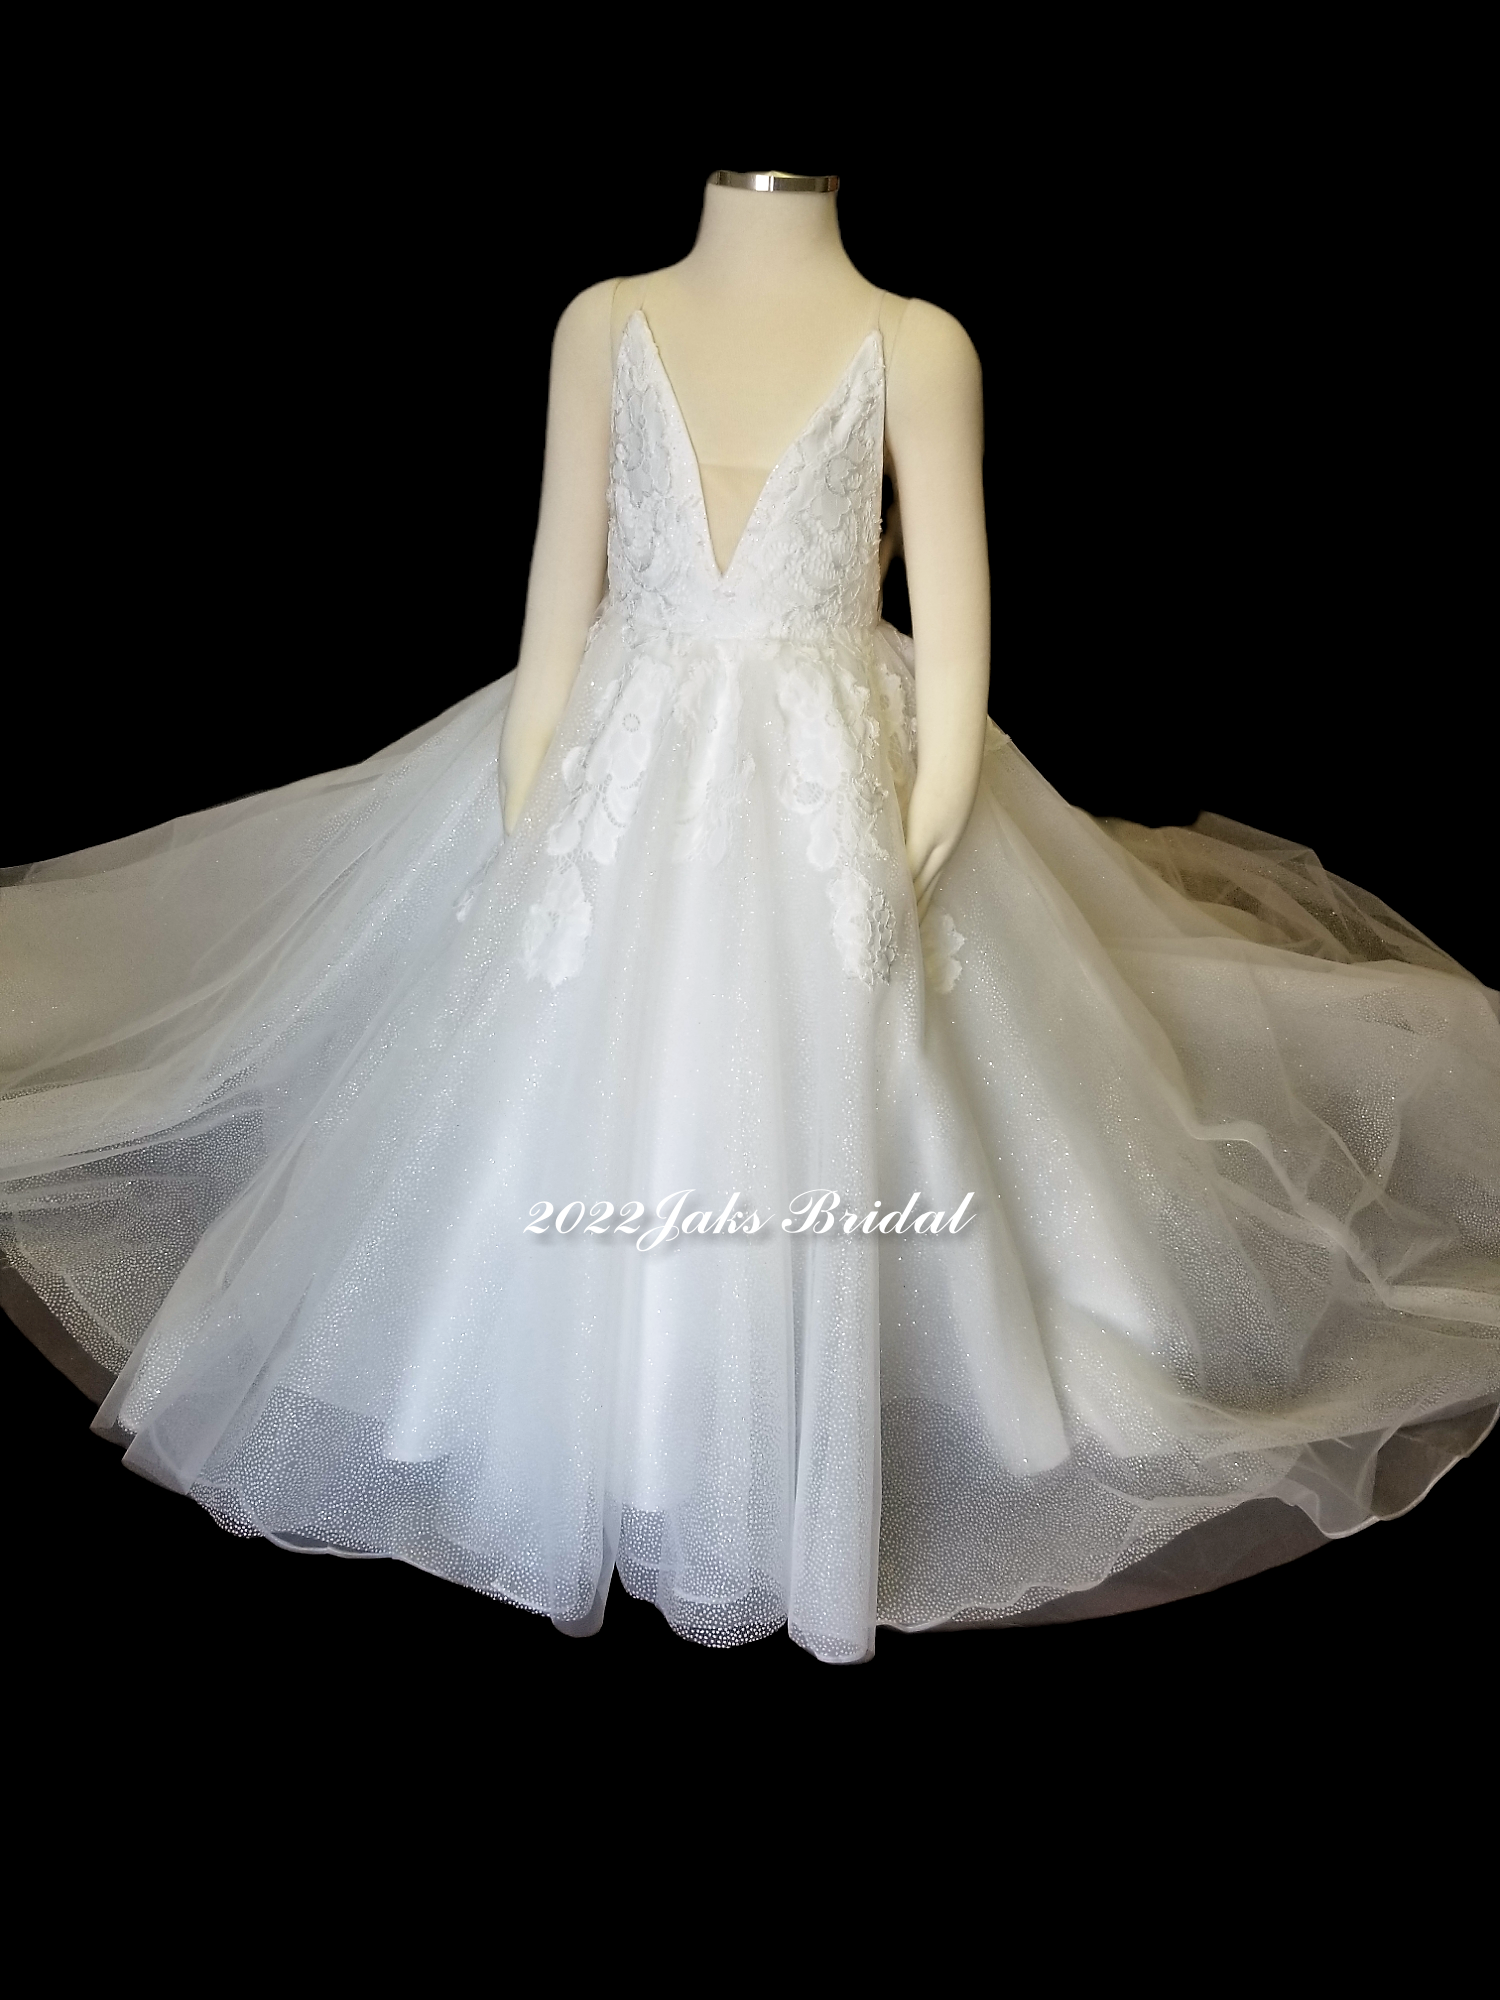 Flower girl dress with plunging neckline, illusion modesty panel, side cut outs, full tulle skirt with lace appliques.